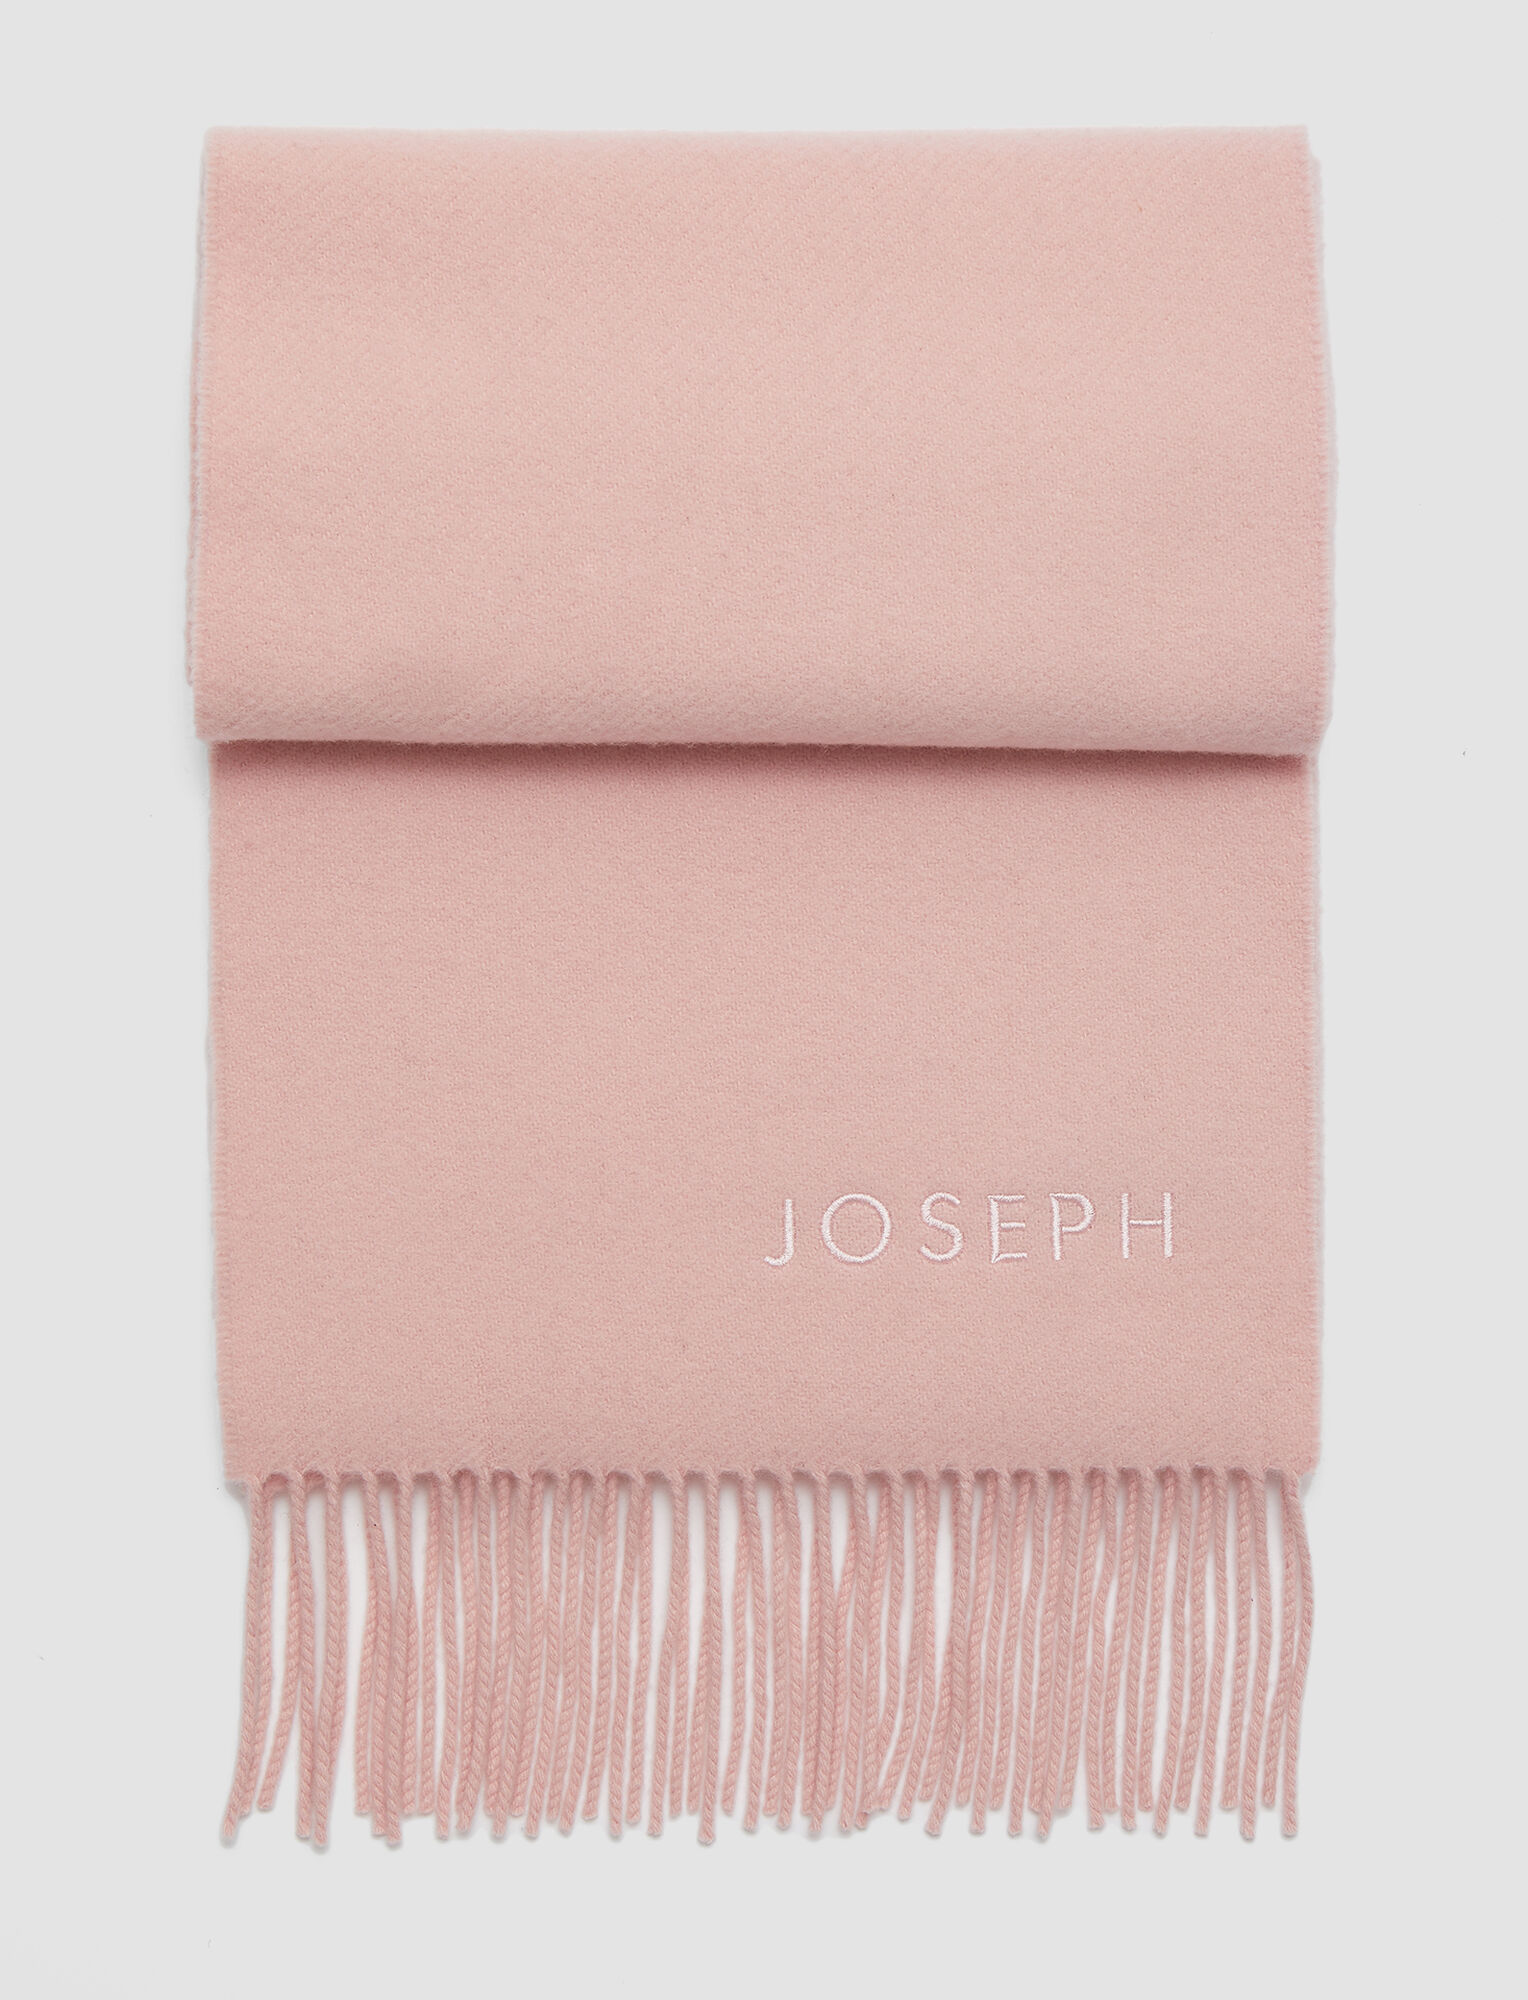 Joseph, Wool Cashmere Blend Alice Scarf, in Candy